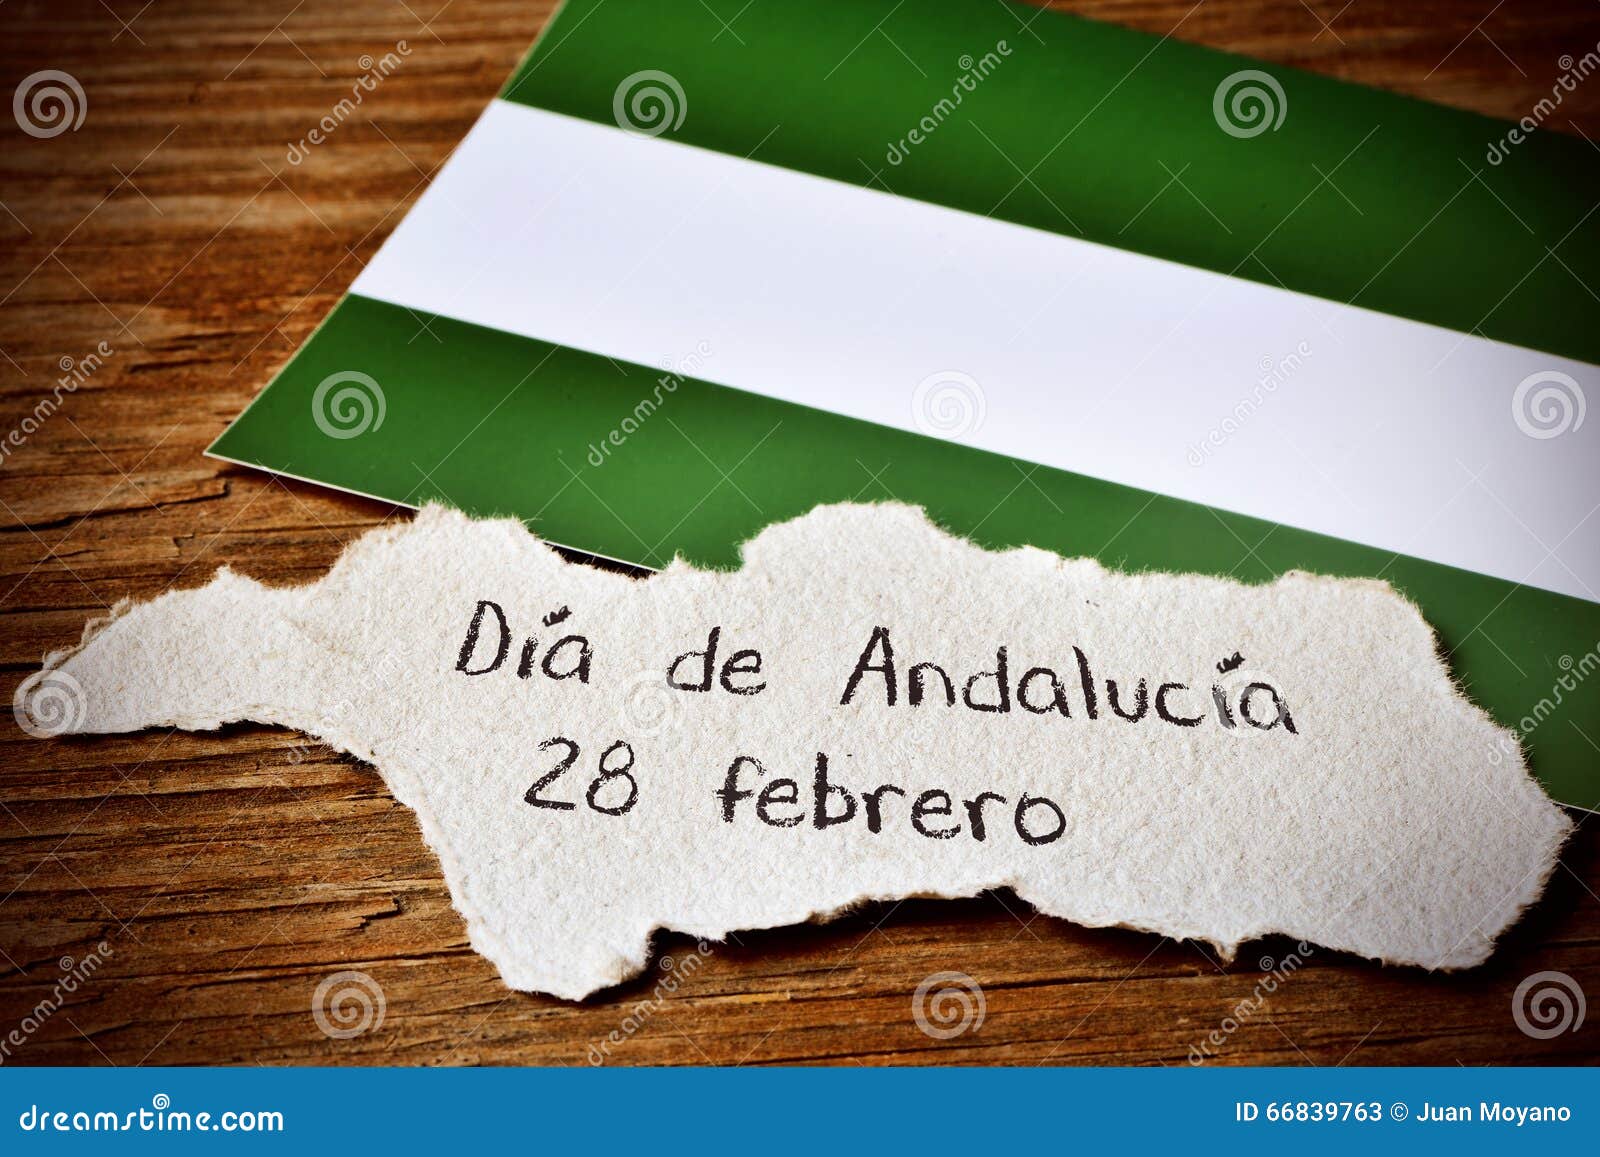 text dia de andalucia, day of andalusia, in spain